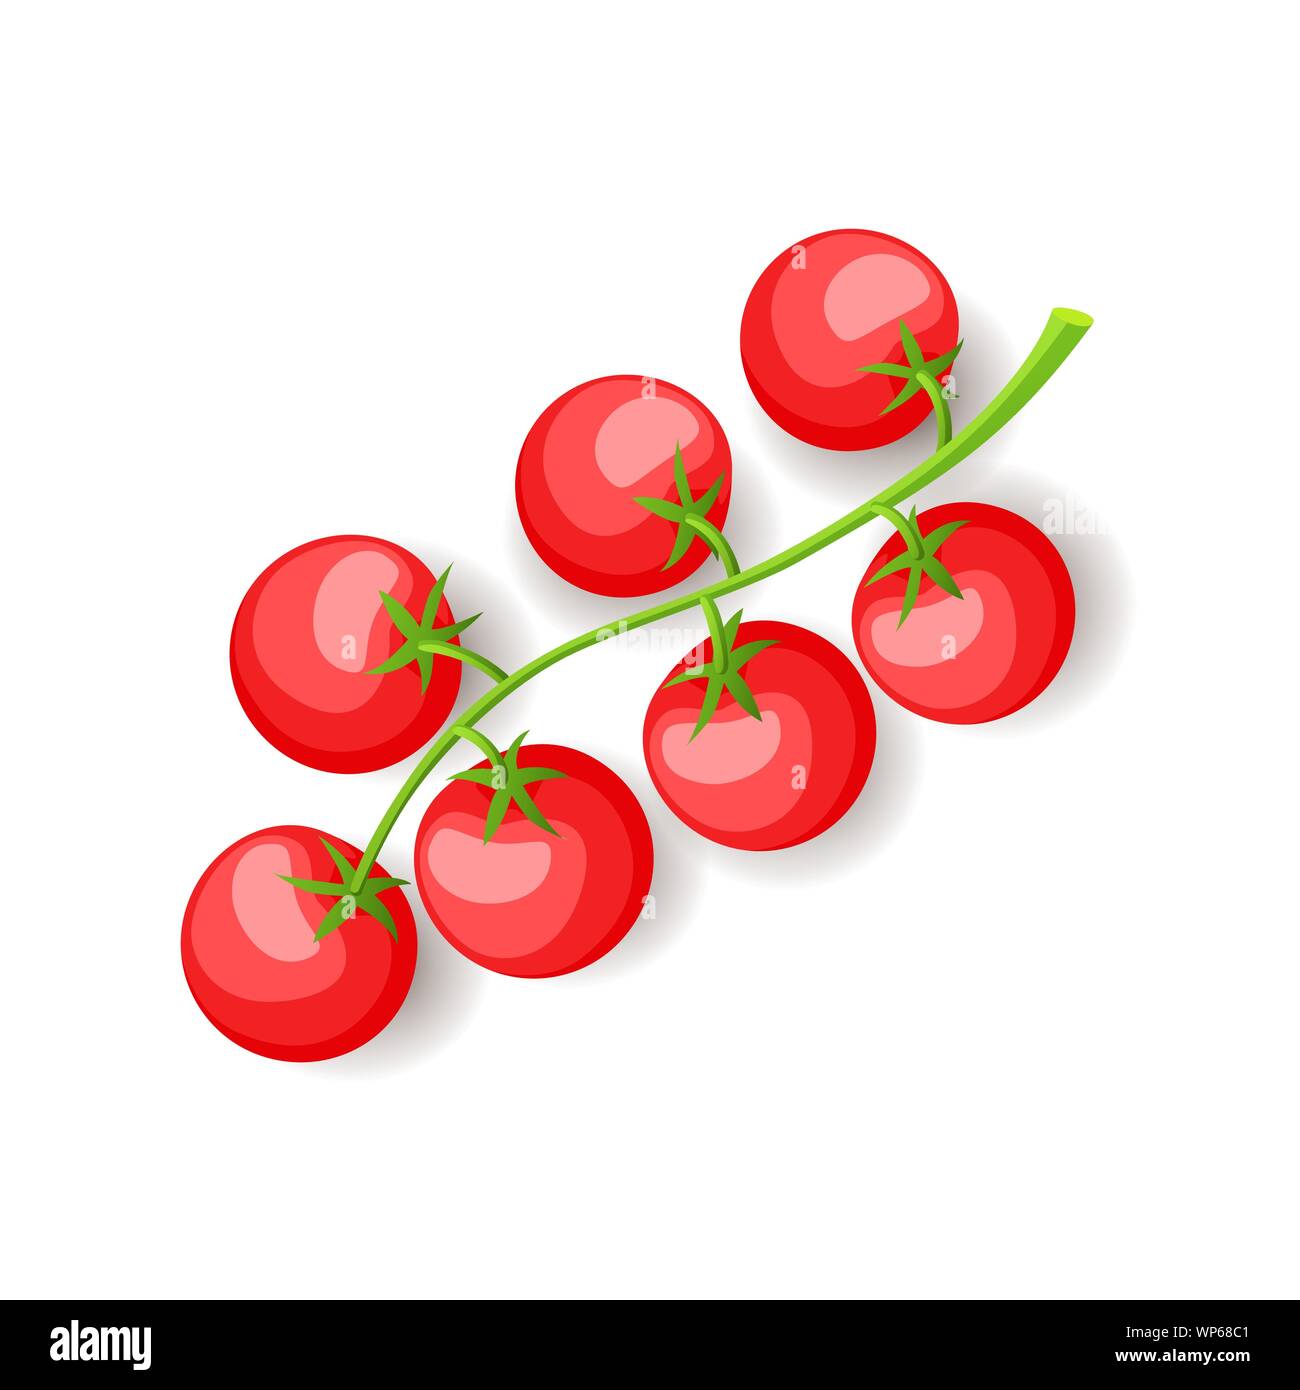 Green Branch With Red Cherry Tomatoes Icon Isolated Fresh Vegetables Organic Healthy Food Vector Illustration Stock Vector Image Art Alamy